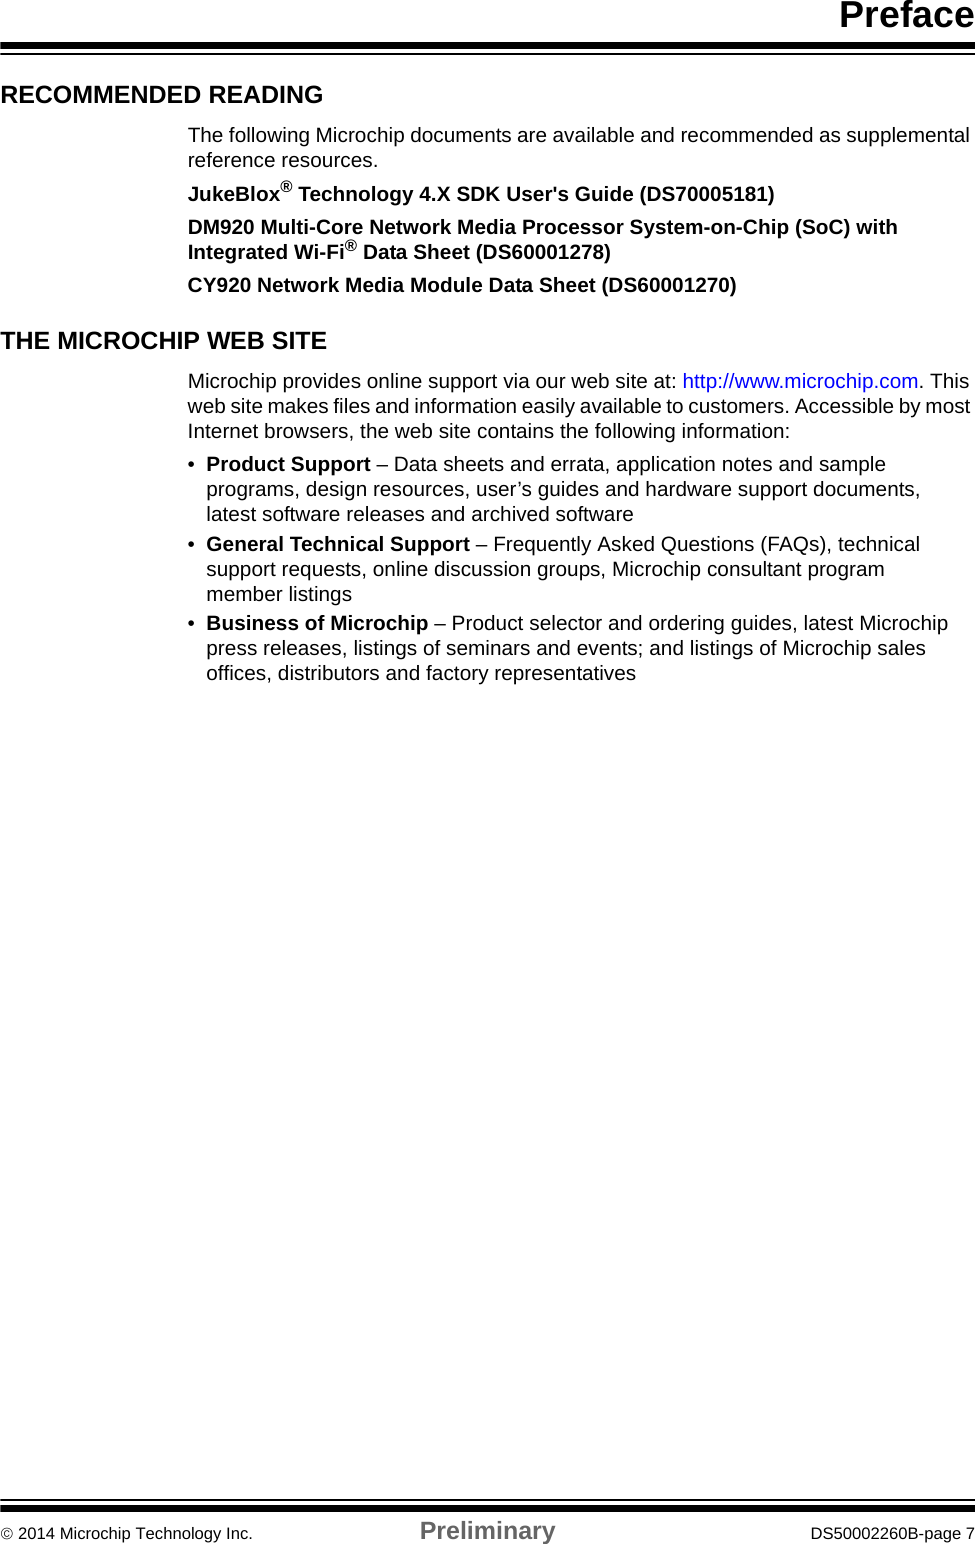 Preface 2014 Microchip Technology Inc. Preliminary DS50002260B-page 7RECOMMENDED READINGThe following Microchip documents are available and recommended as supplemental reference resources.JukeBlox® Technology 4.X SDK User&apos;s Guide (DS70005181)DM920 Multi-Core Network Media Processor System-on-Chip (SoC) with Integrated Wi-Fi® Data Sheet (DS60001278)CY920 Network Media Module Data Sheet (DS60001270)THE MICROCHIP WEB SITEMicrochip provides online support via our web site at: http://www.microchip.com. This web site makes files and information easily available to customers. Accessible by most Internet browsers, the web site contains the following information:•Product Support – Data sheets and errata, application notes and sample programs, design resources, user’s guides and hardware support documents, latest software releases and archived software•General Technical Support – Frequently Asked Questions (FAQs), technical support requests, online discussion groups, Microchip consultant program member listings•Business of Microchip – Product selector and ordering guides, latest Microchip press releases, listings of seminars and events; and listings of Microchip sales offices, distributors and factory representatives